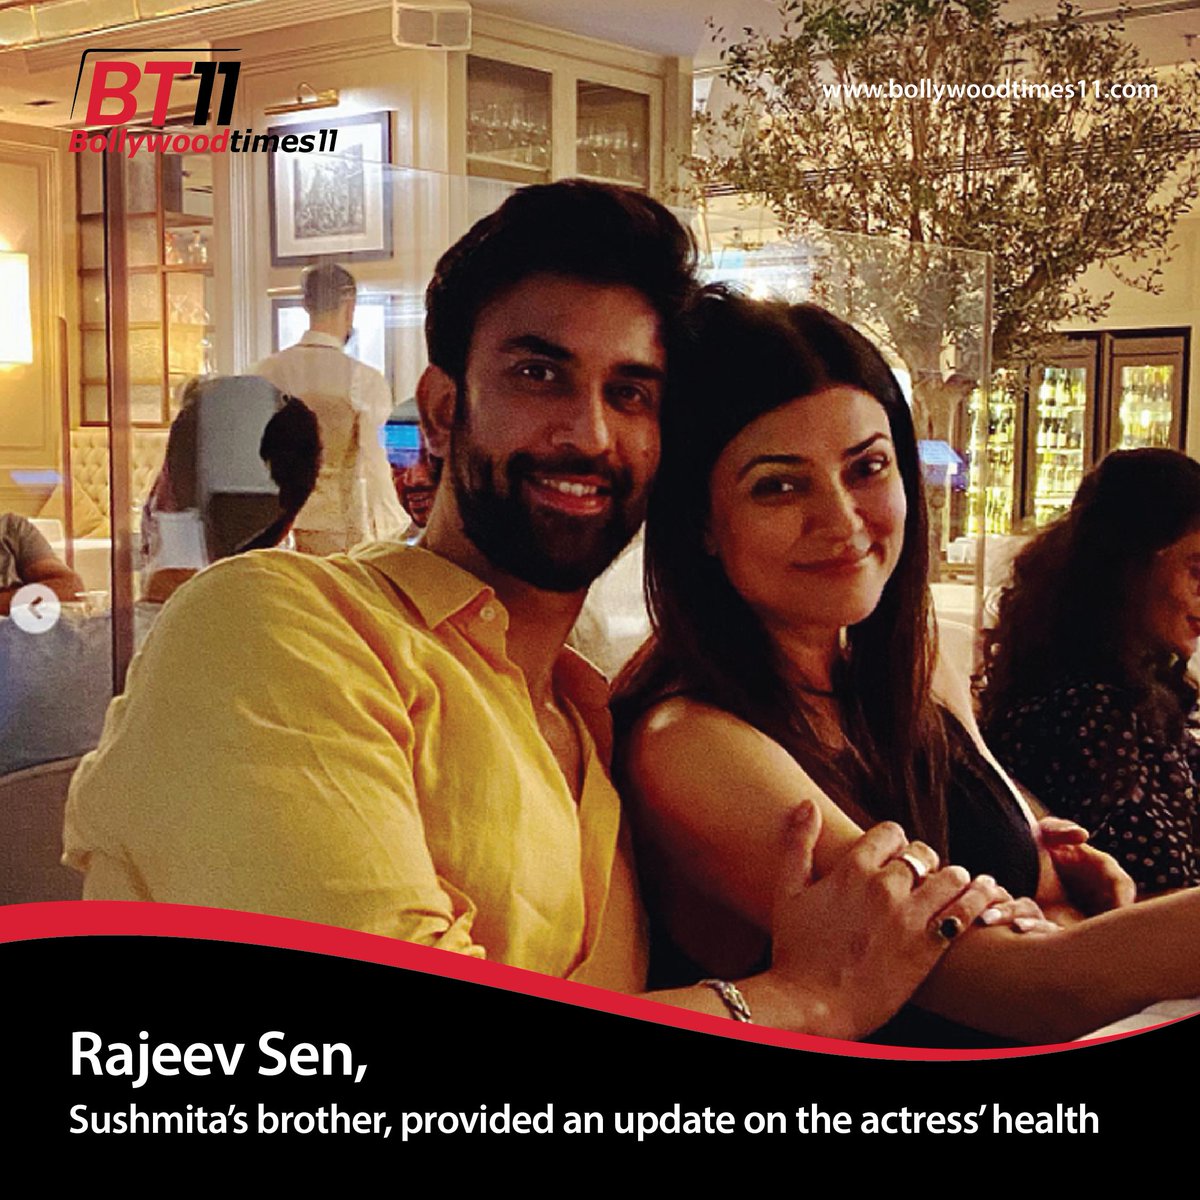 Rajeev Sen, Sushmita’s brother, provided an update on the actress’ health🥲

Read the full article- bit.ly/3V3pqOB

#rajeevsen #sushmitasen #actress #star #model #update #health #angioplasty #sickness #brother #news #update #bollywoodtimes11